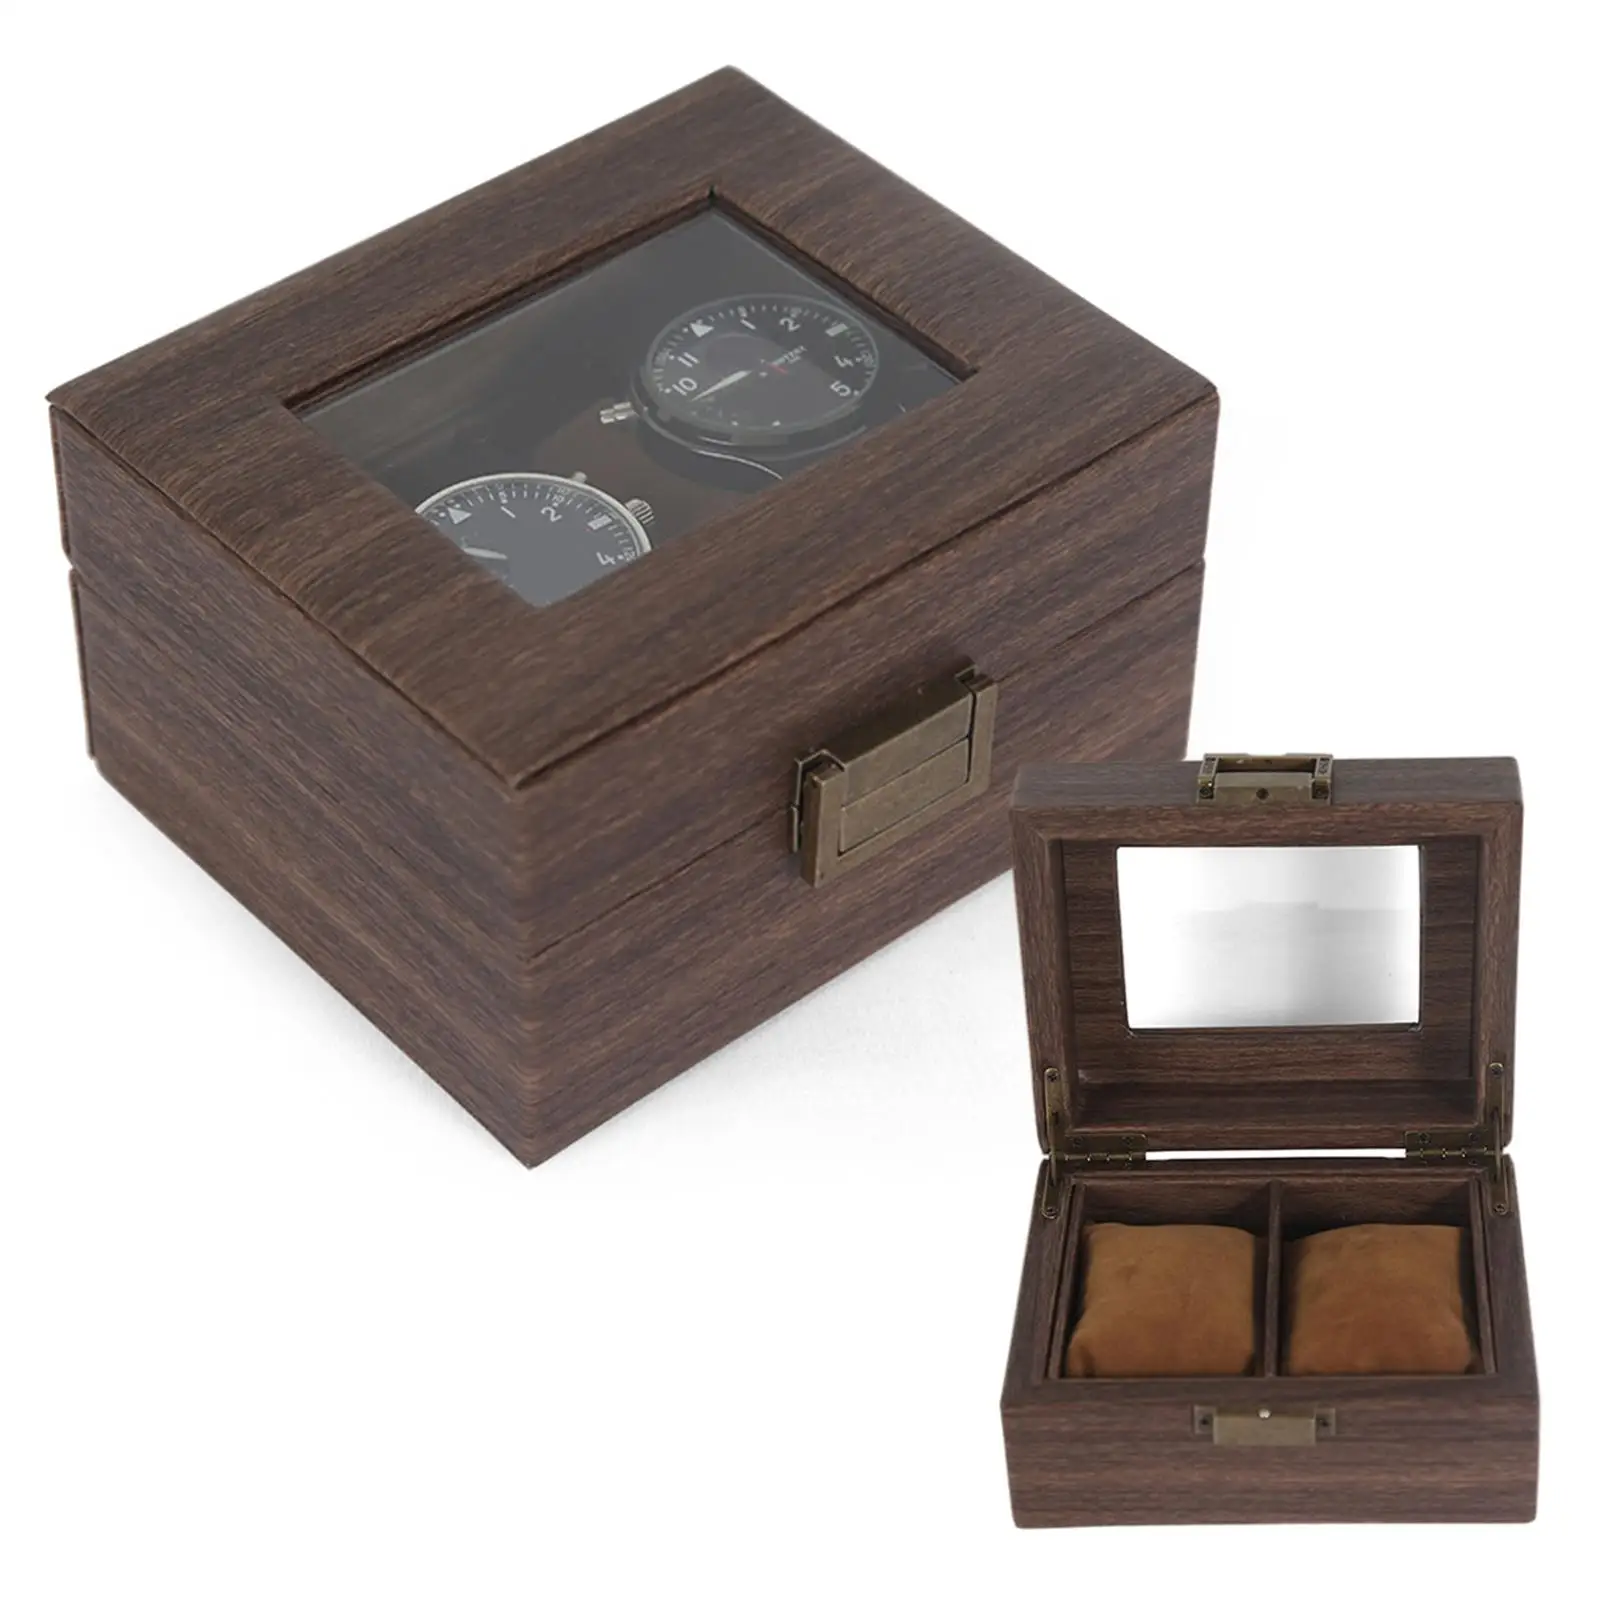 Watch Display Case, and Lock ,Vintage Wood, with Glass Top 2 Slot Wrist Storage Box Jewelry Organizer for Gifts Men Women